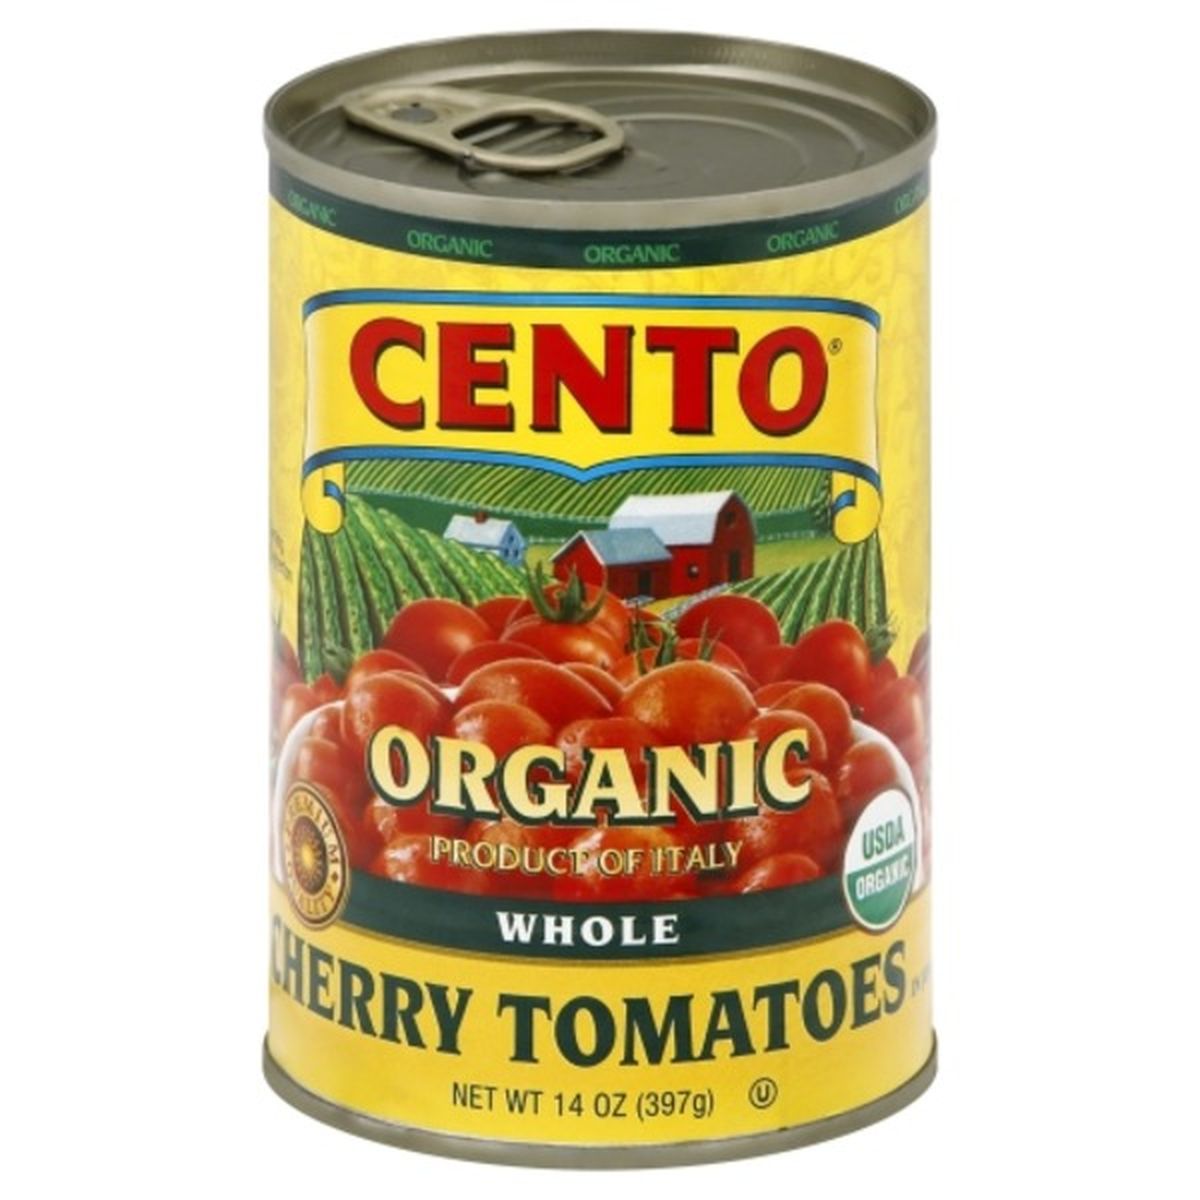 Calories in Cento Cherry Tomatoes, Organic, Whole